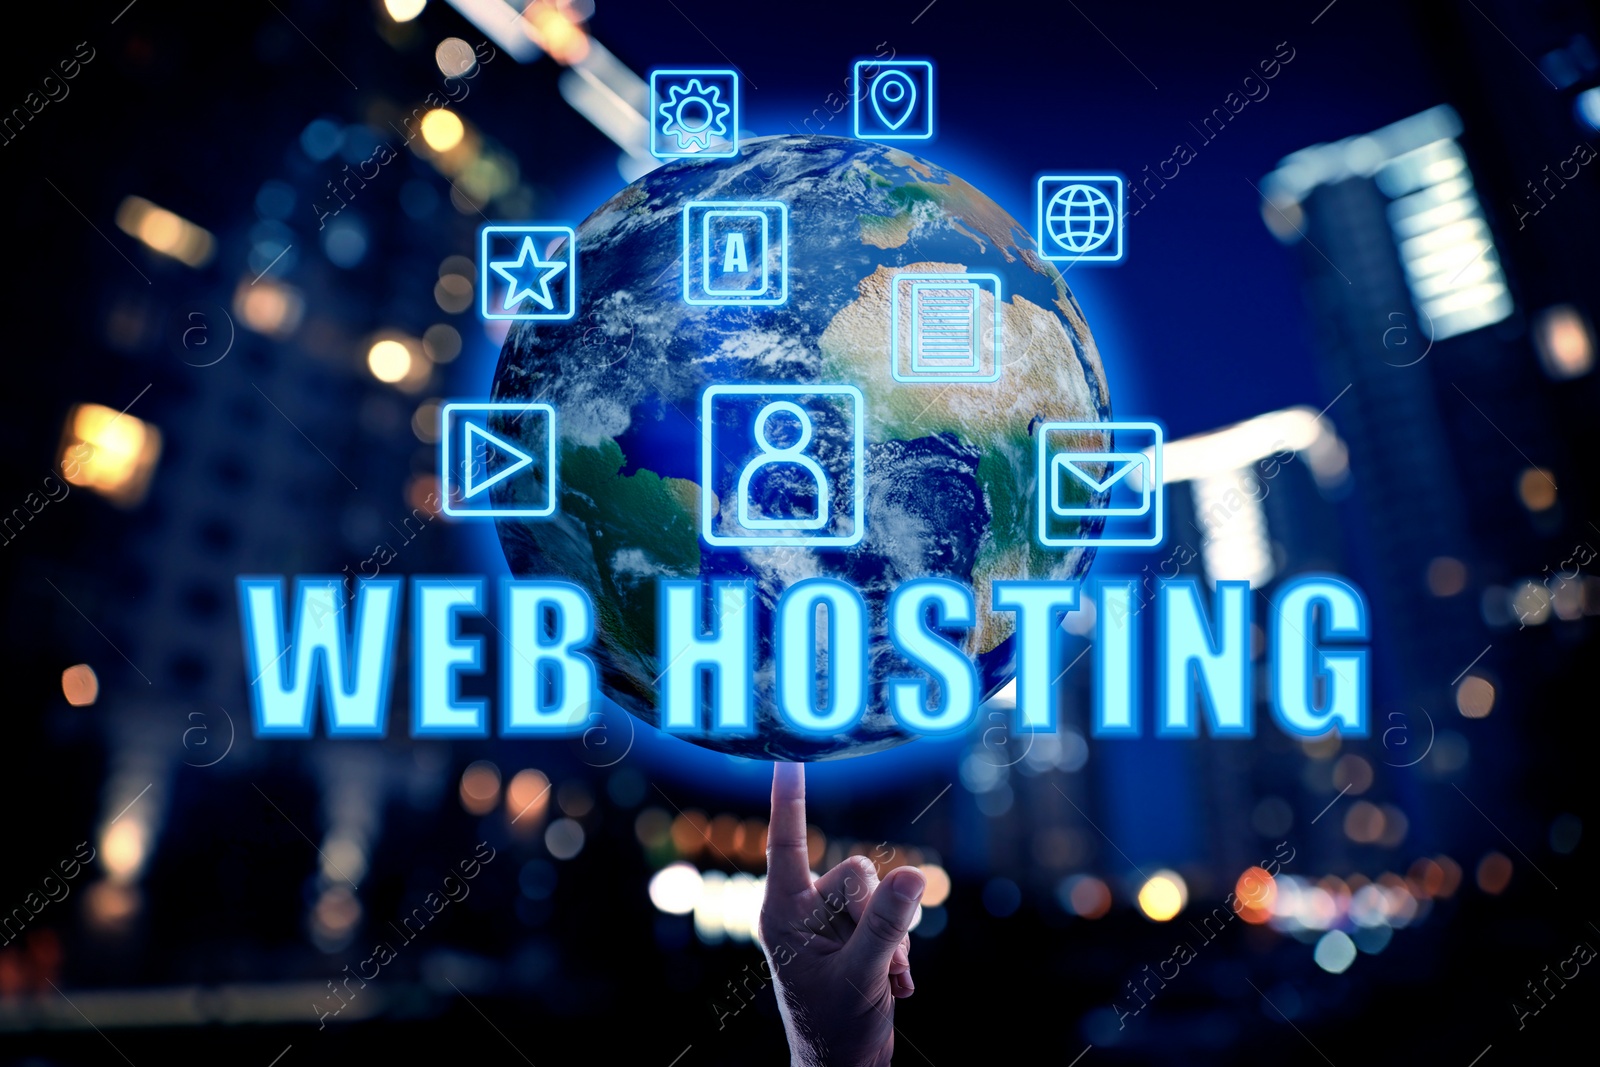 Image of Web hosting. Man touching globe with icons against blurred cityscape, closeup